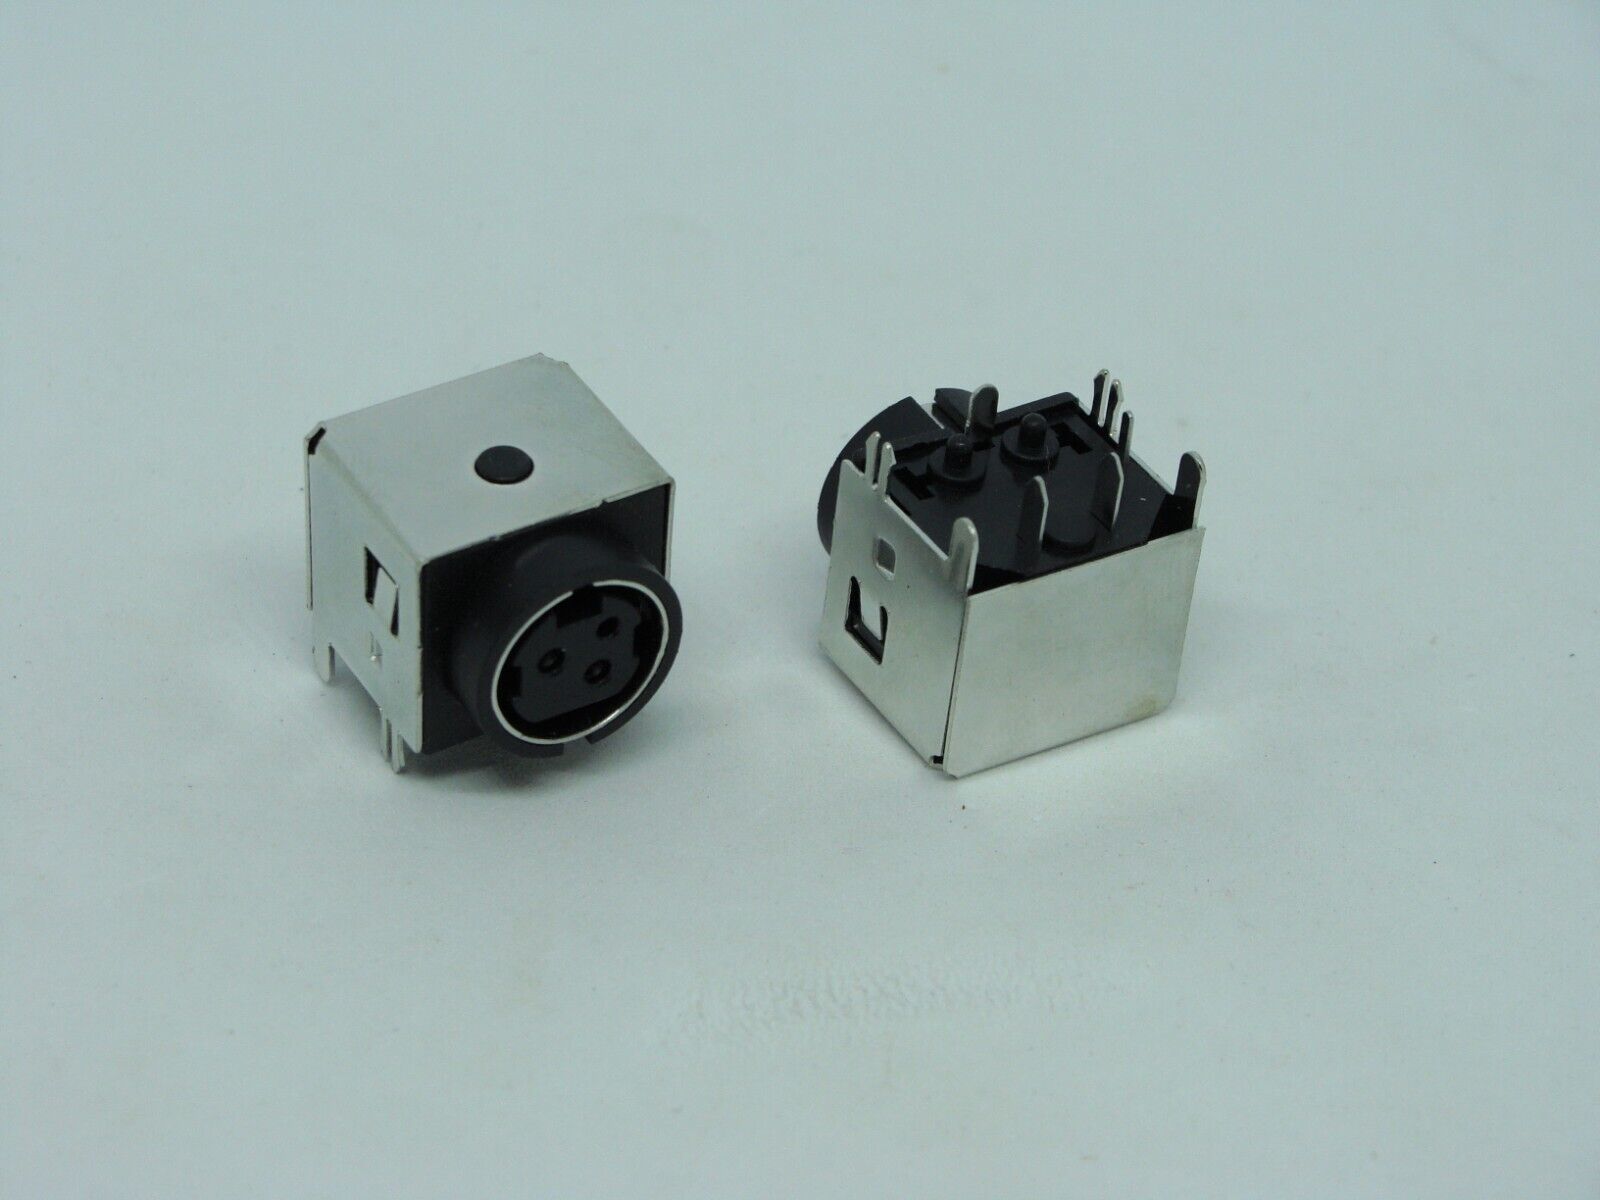 Primary image for 2x DIN 3 Pins S Terminal Female Jack Socket Power Plug Connection Port DIN-312